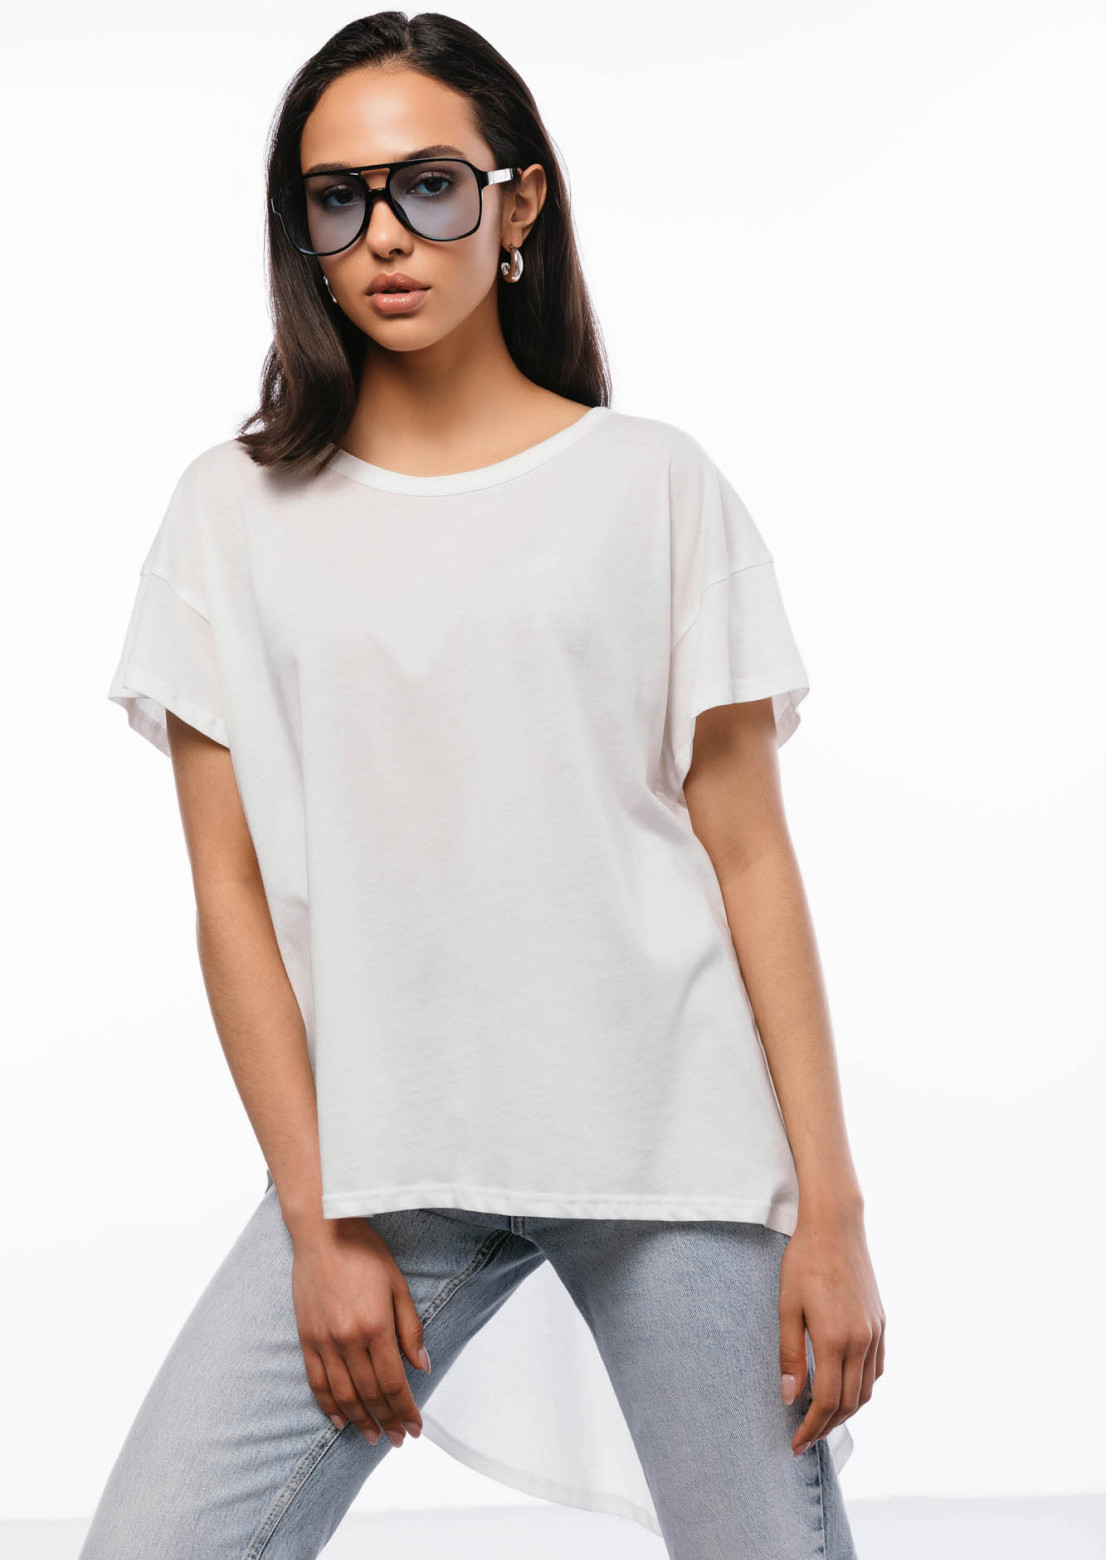 White T-shirt with a tail made of jersey